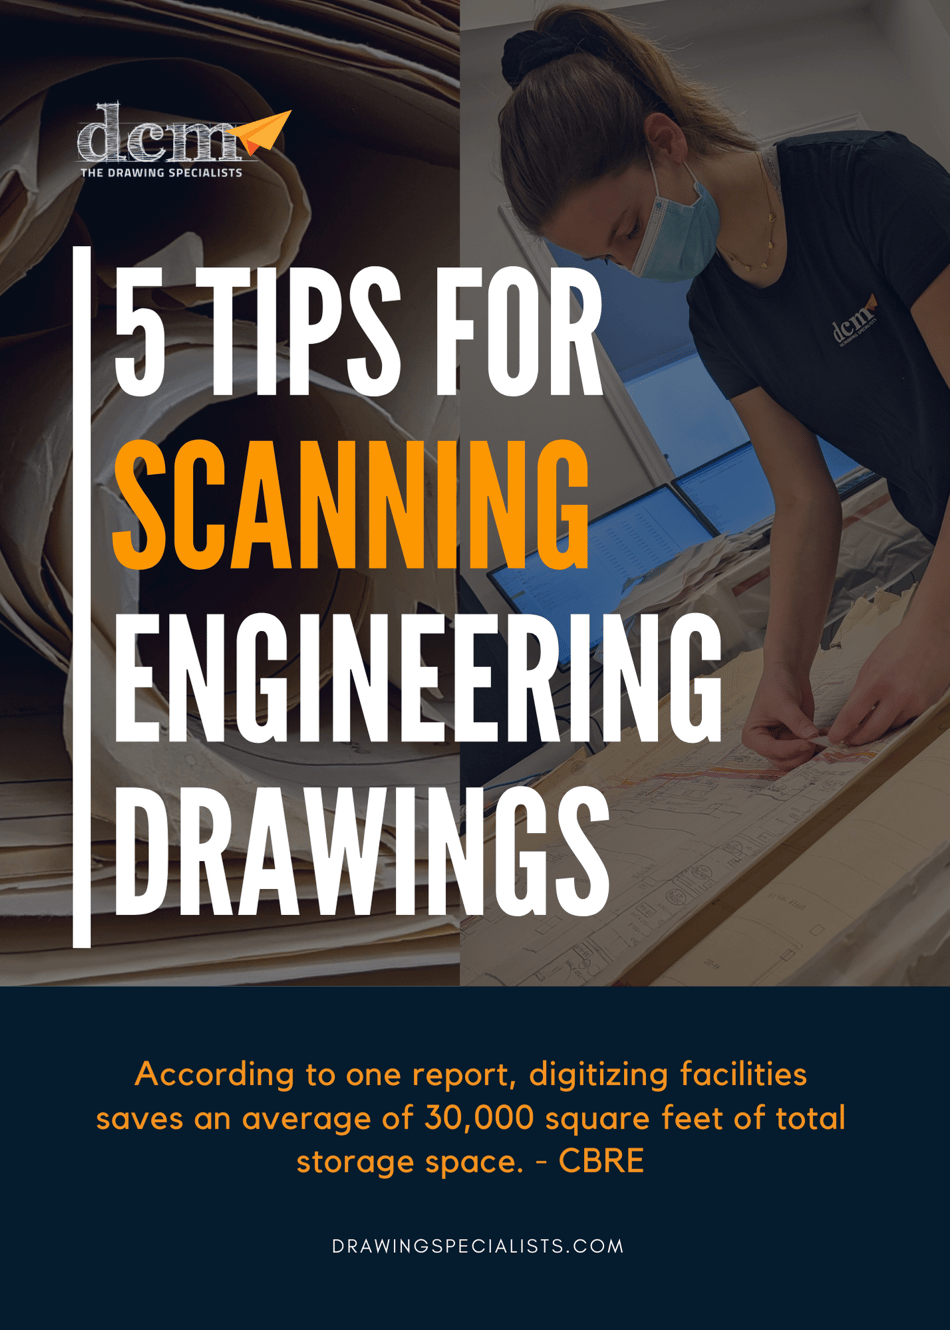 How to scan engineering drawings right the first time.